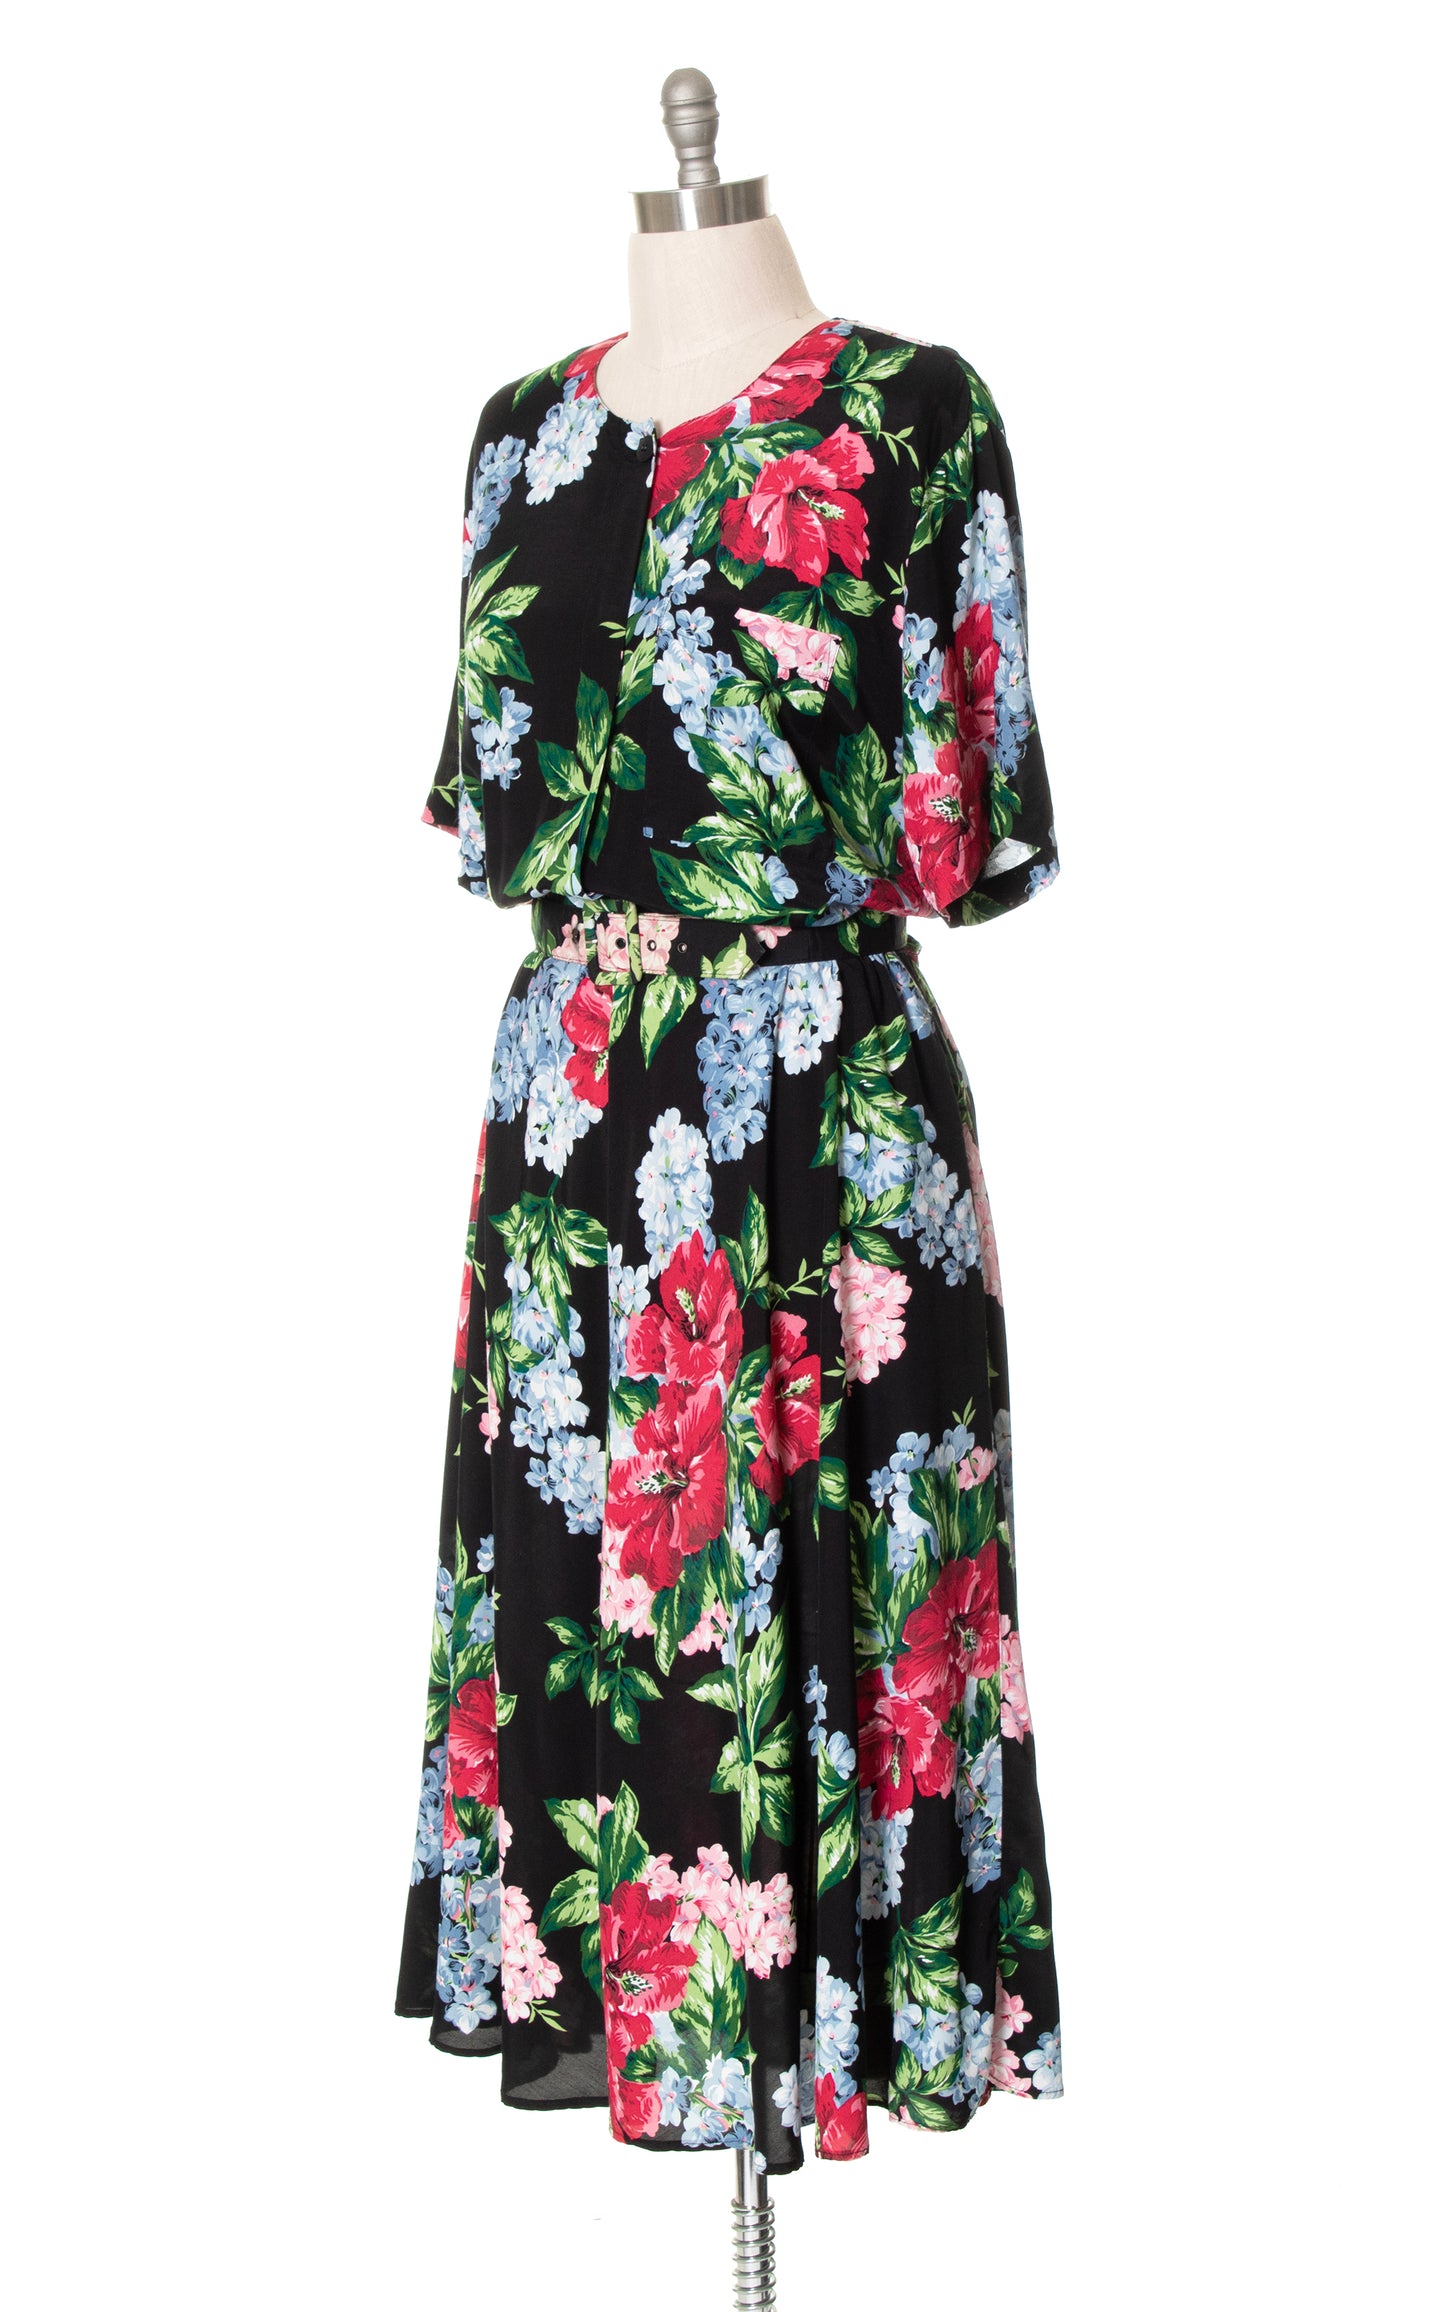 1980s CAROL ANDERSON Hibiscus Floral Rayon Dress with Pockets | x-large+